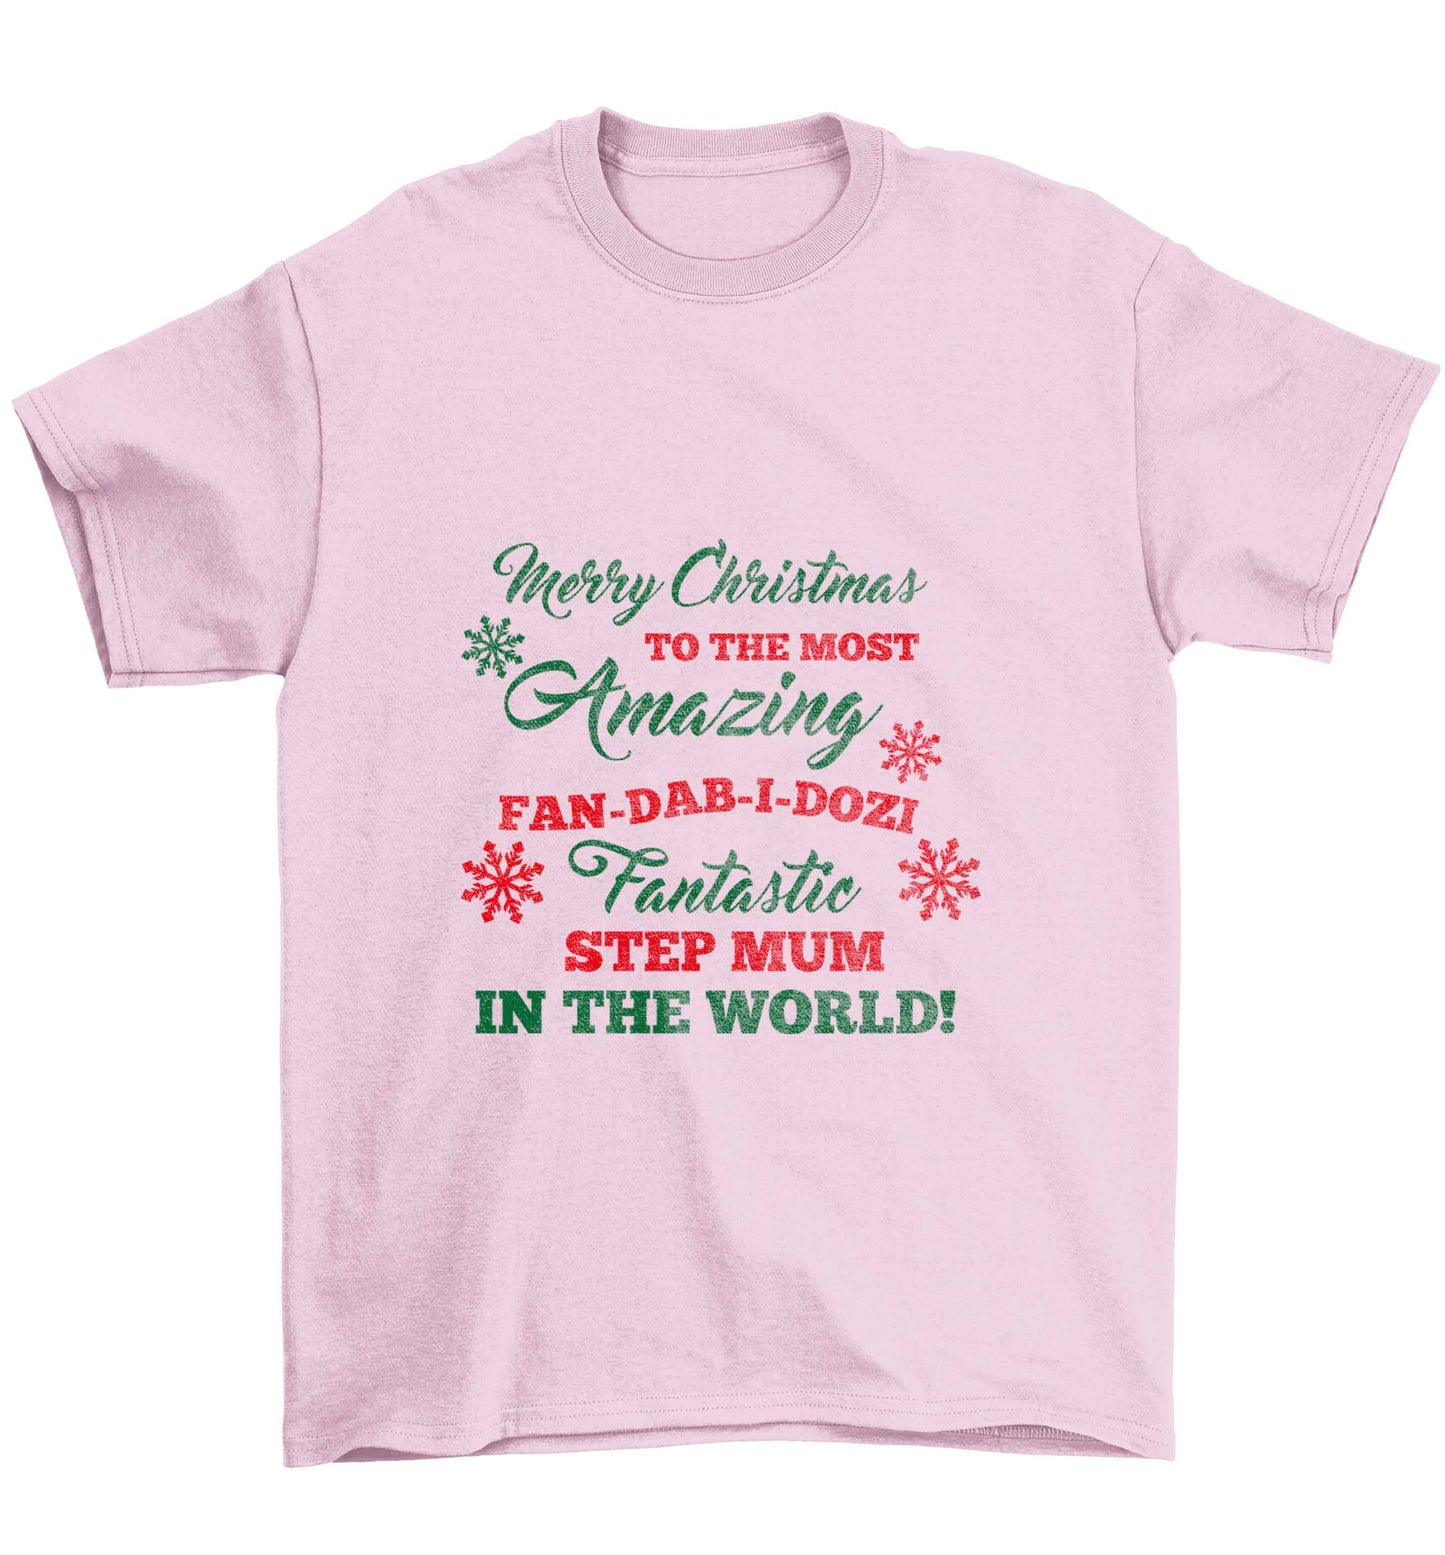 Merry Christmas to the most amazing fan-dab-i-dozi fantasic Step Mum in the world Children's light pink Tshirt 12-13 Years